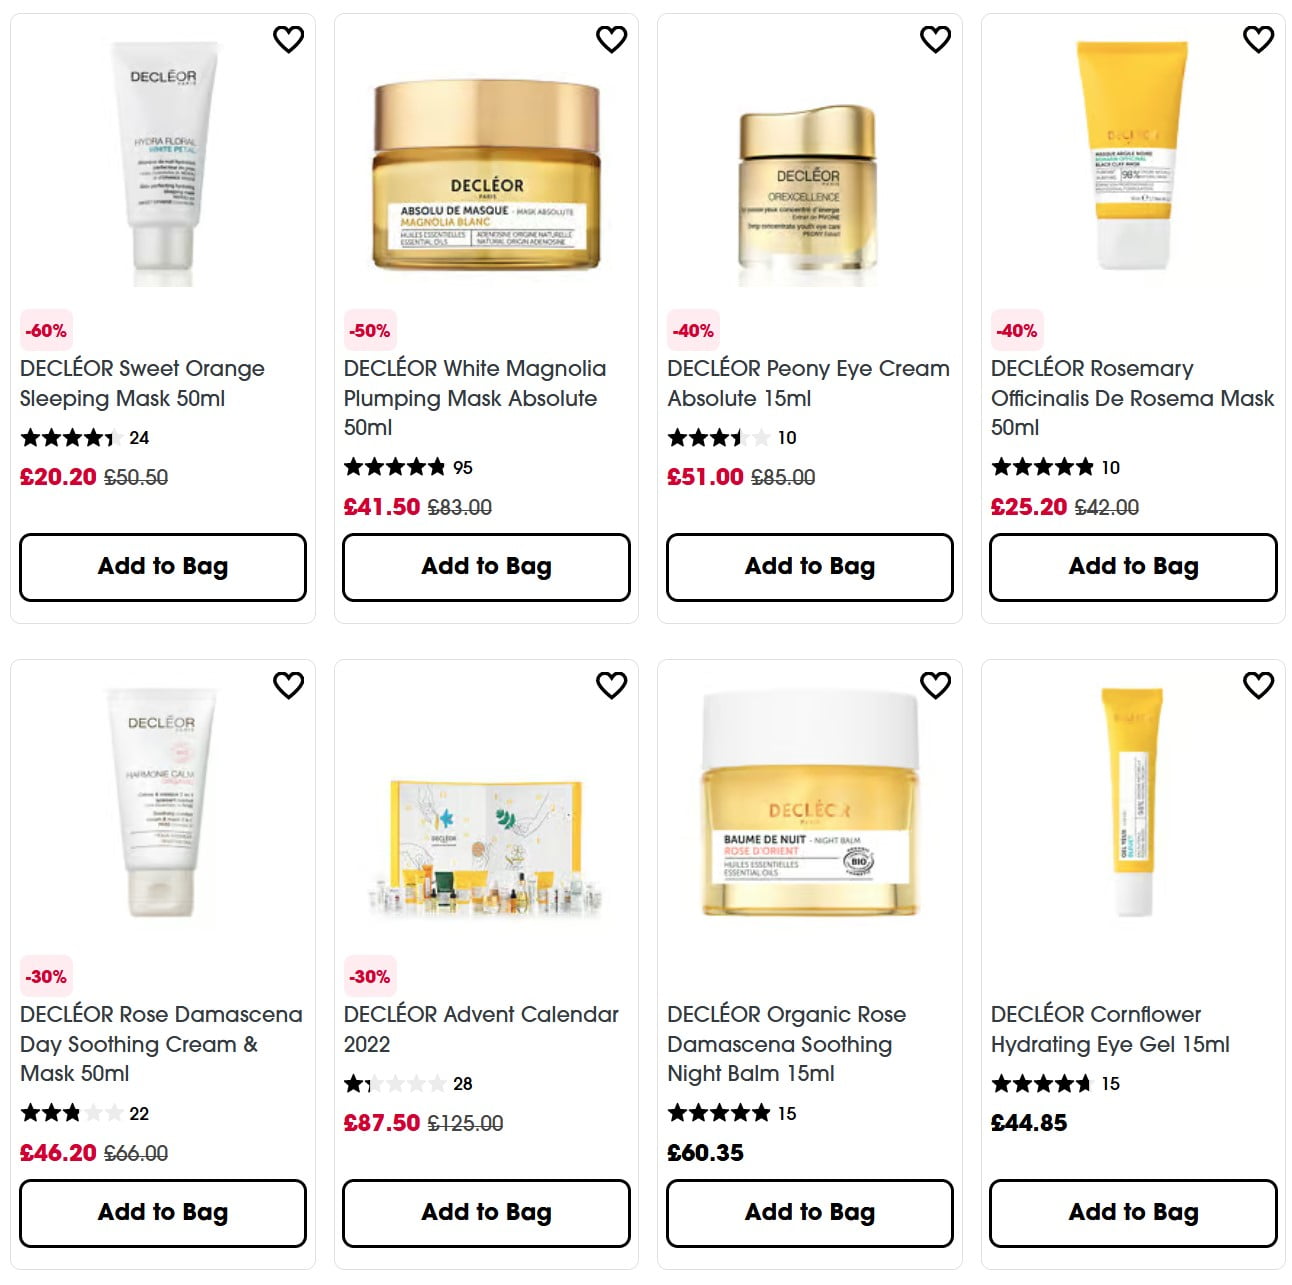 Up to 60% off Decleor at Sephora UK